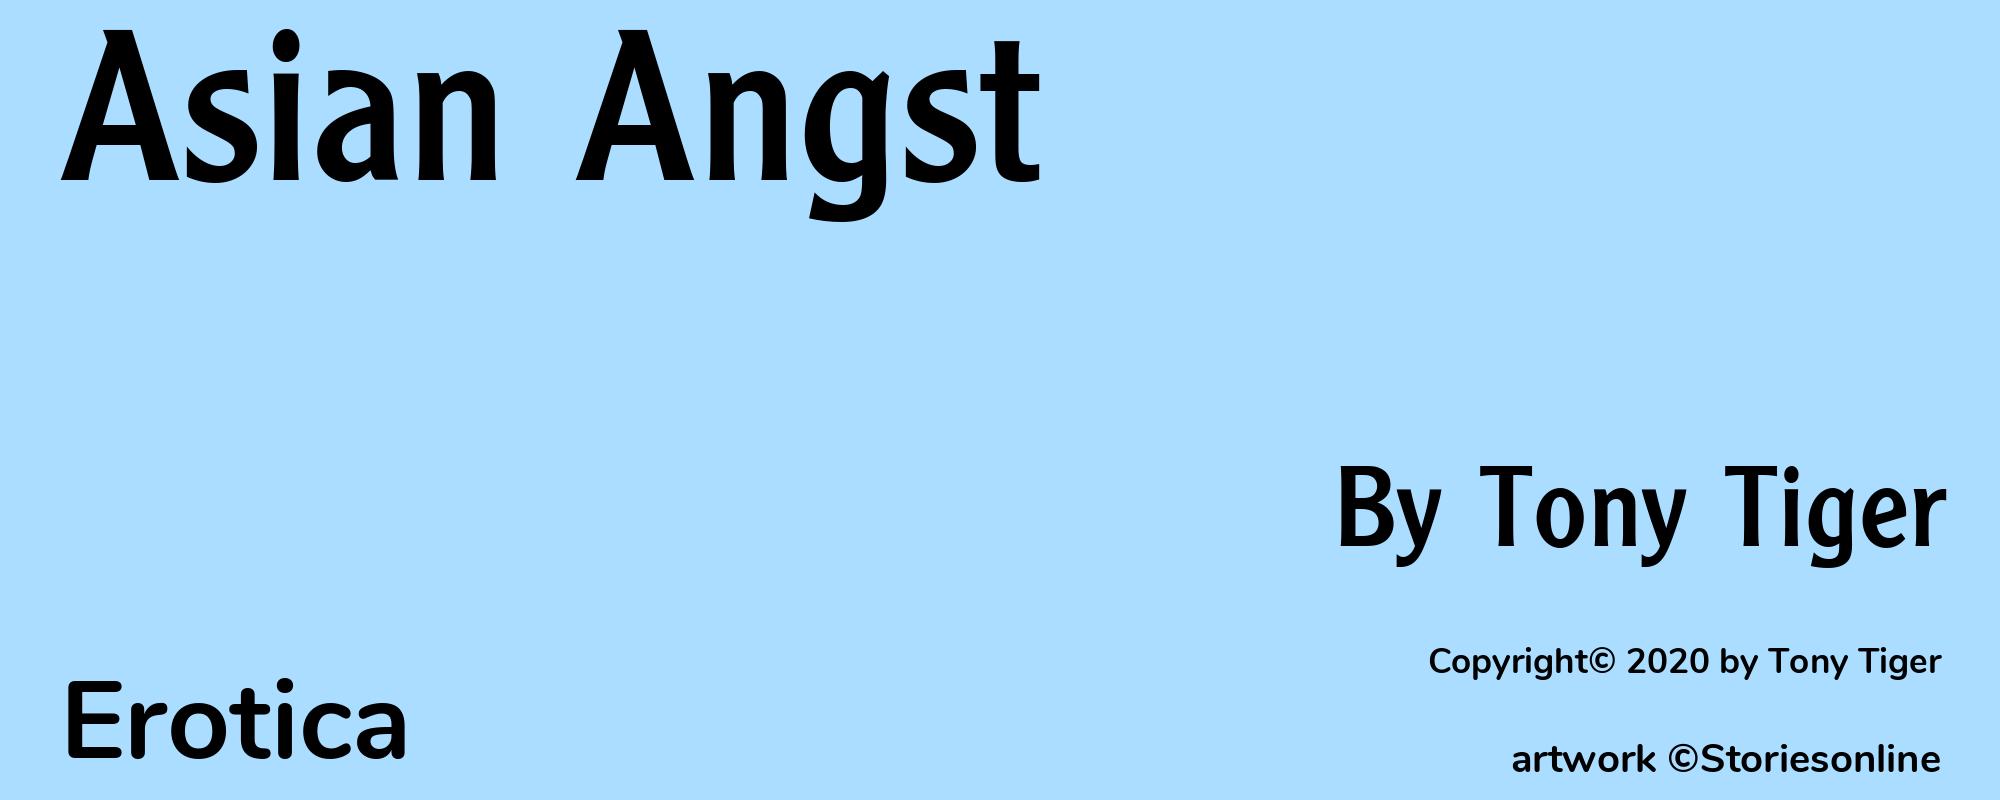 Asian Angst - Cover